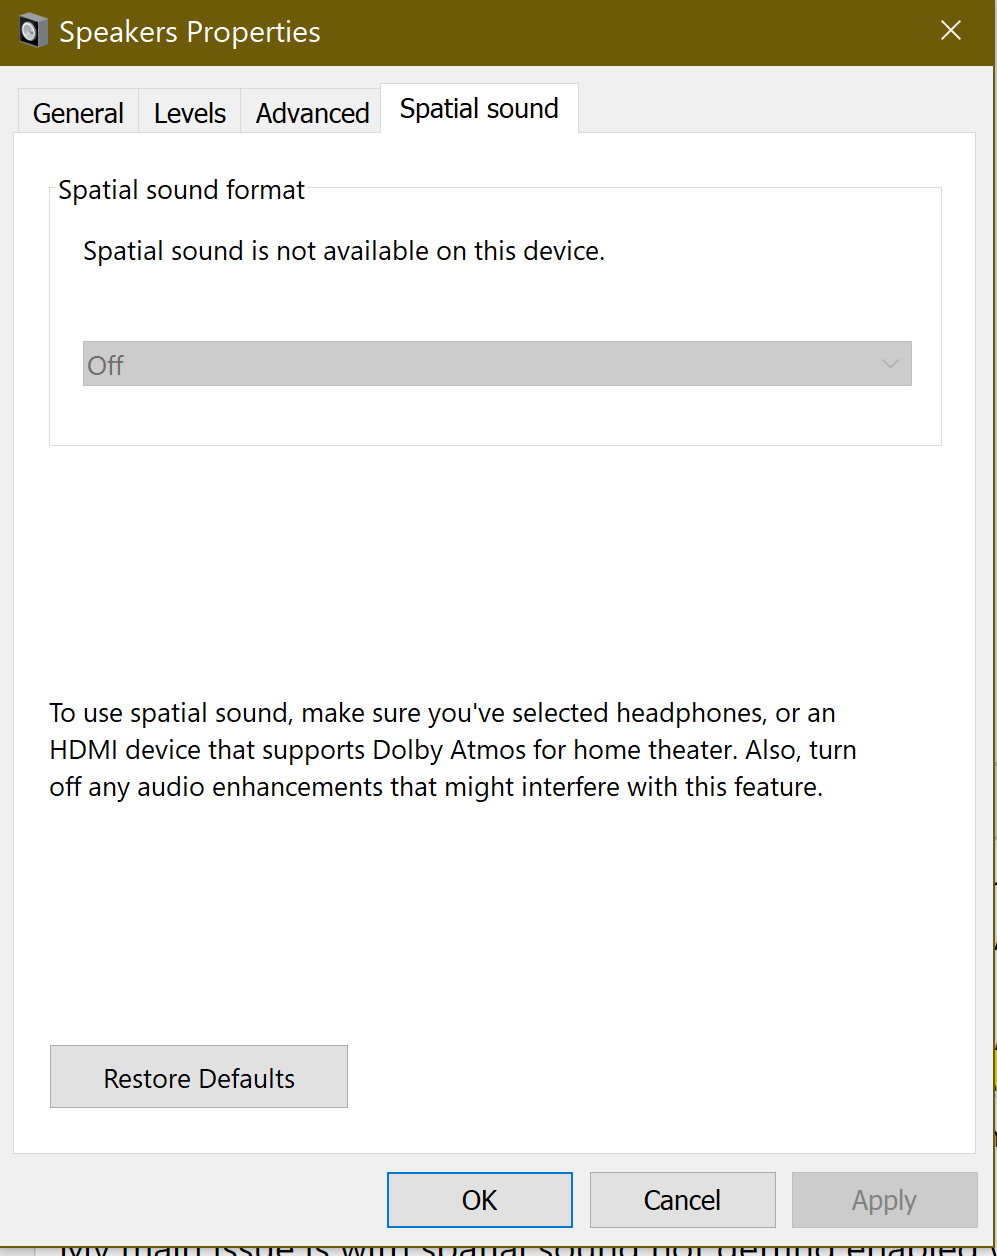 Realtek High Definition Audio Driver Not Showing In Device Manager Microsoft Community